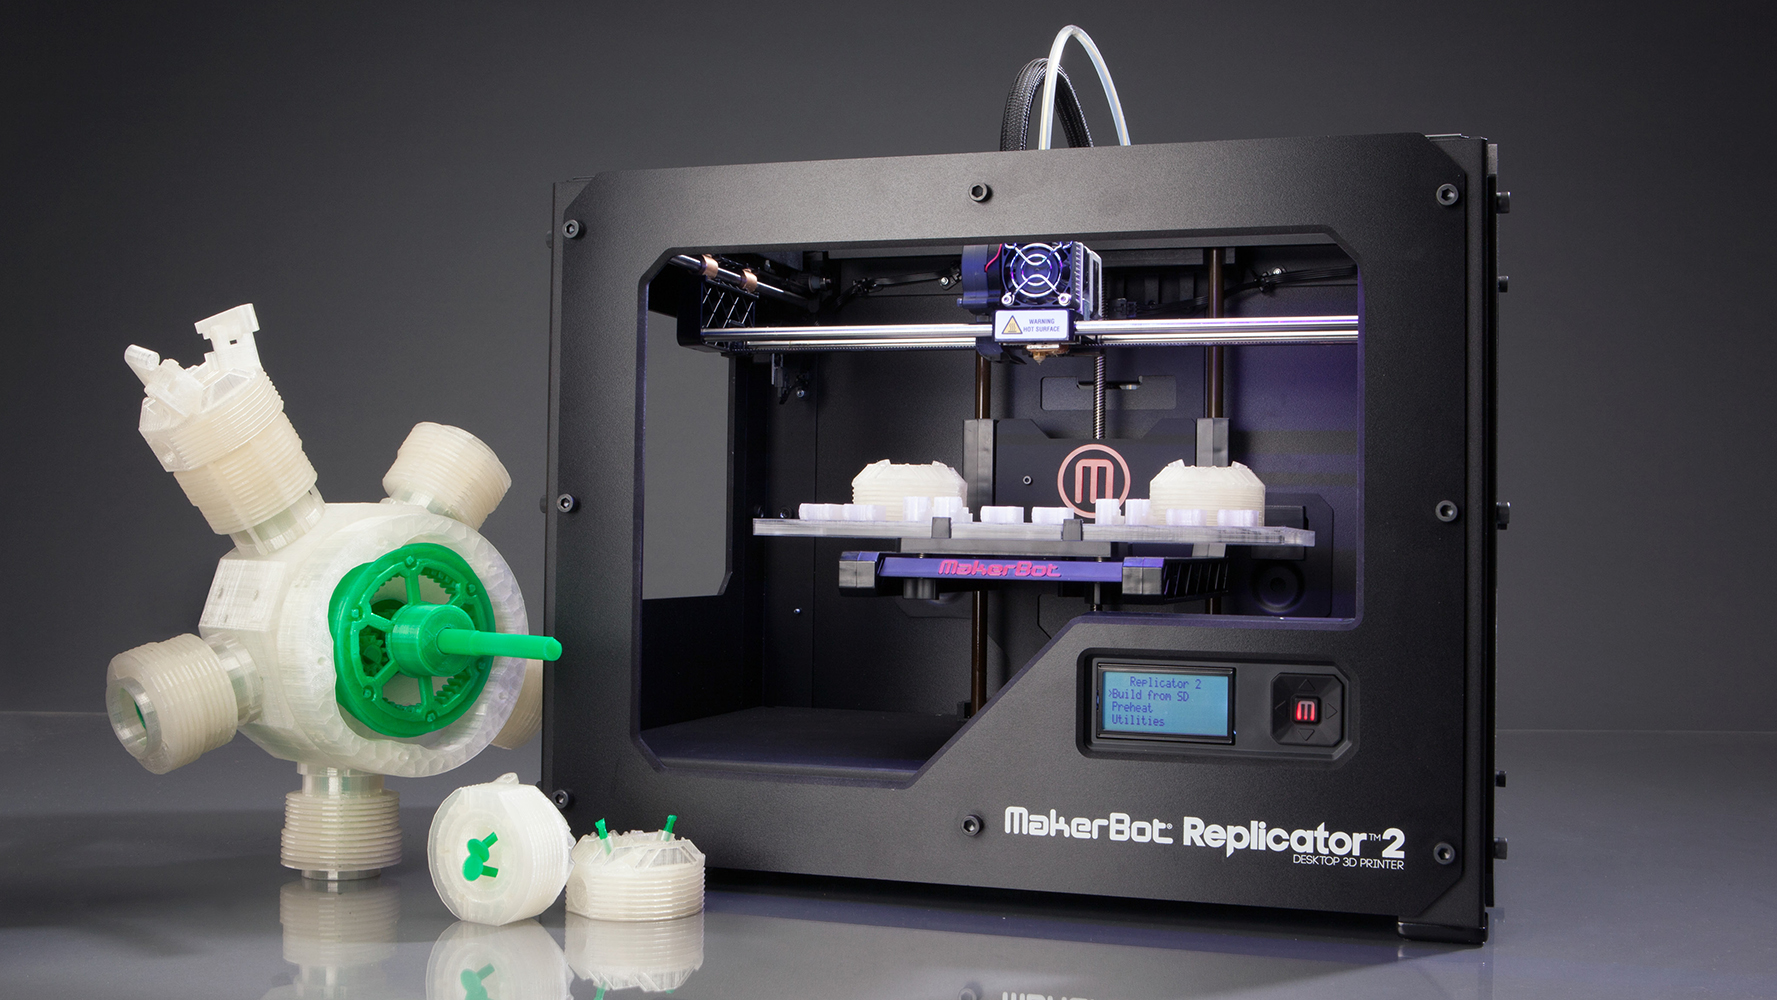 løst Sprællemand Plante 3D printing explained: what's all the fuss about? | TechRadar